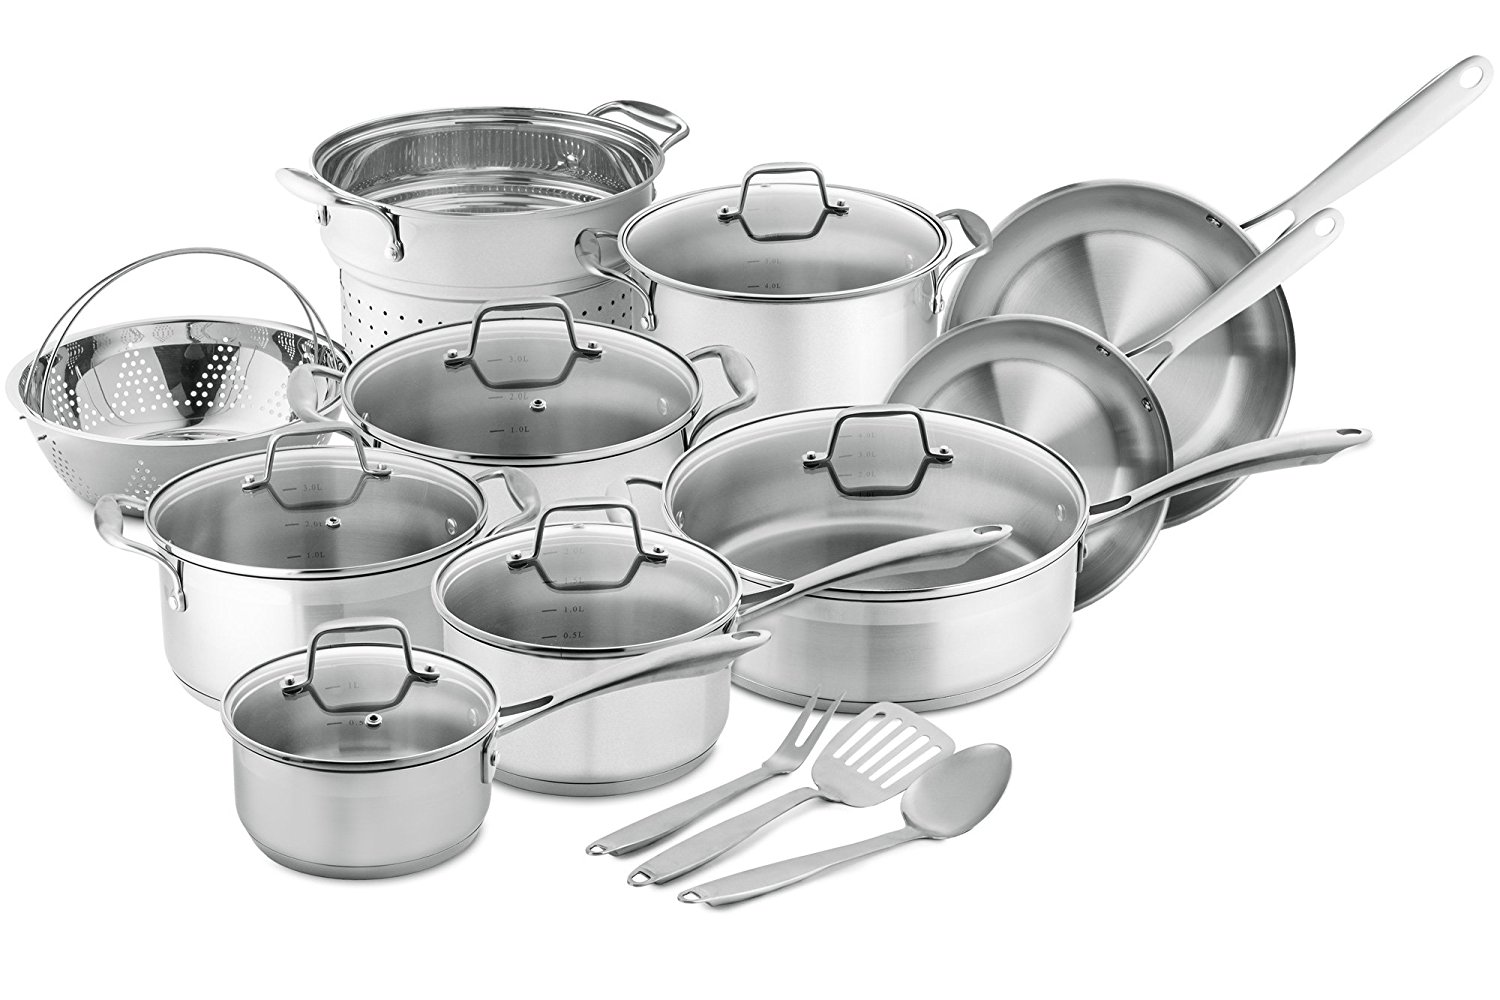 Chef's Star Professional Grade Stainless Steel 17 Piece Pots & Pans Set - Induction Ready Cookware Set with Impact-bonded Technology